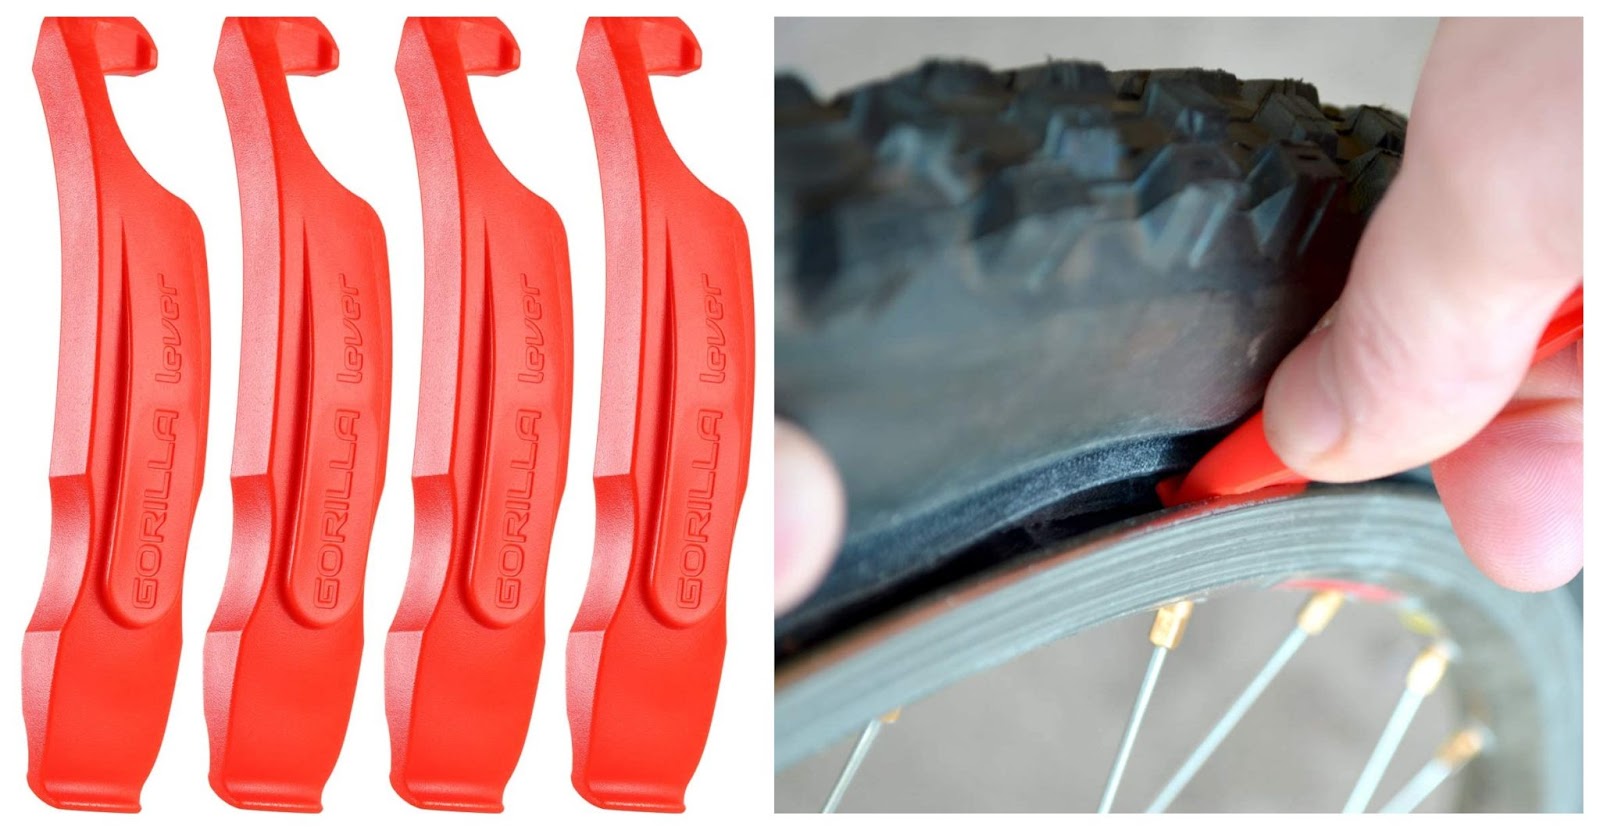 An essential tool for any mountain bike repair kit would be a tire lever which makes changing a tire much easier.